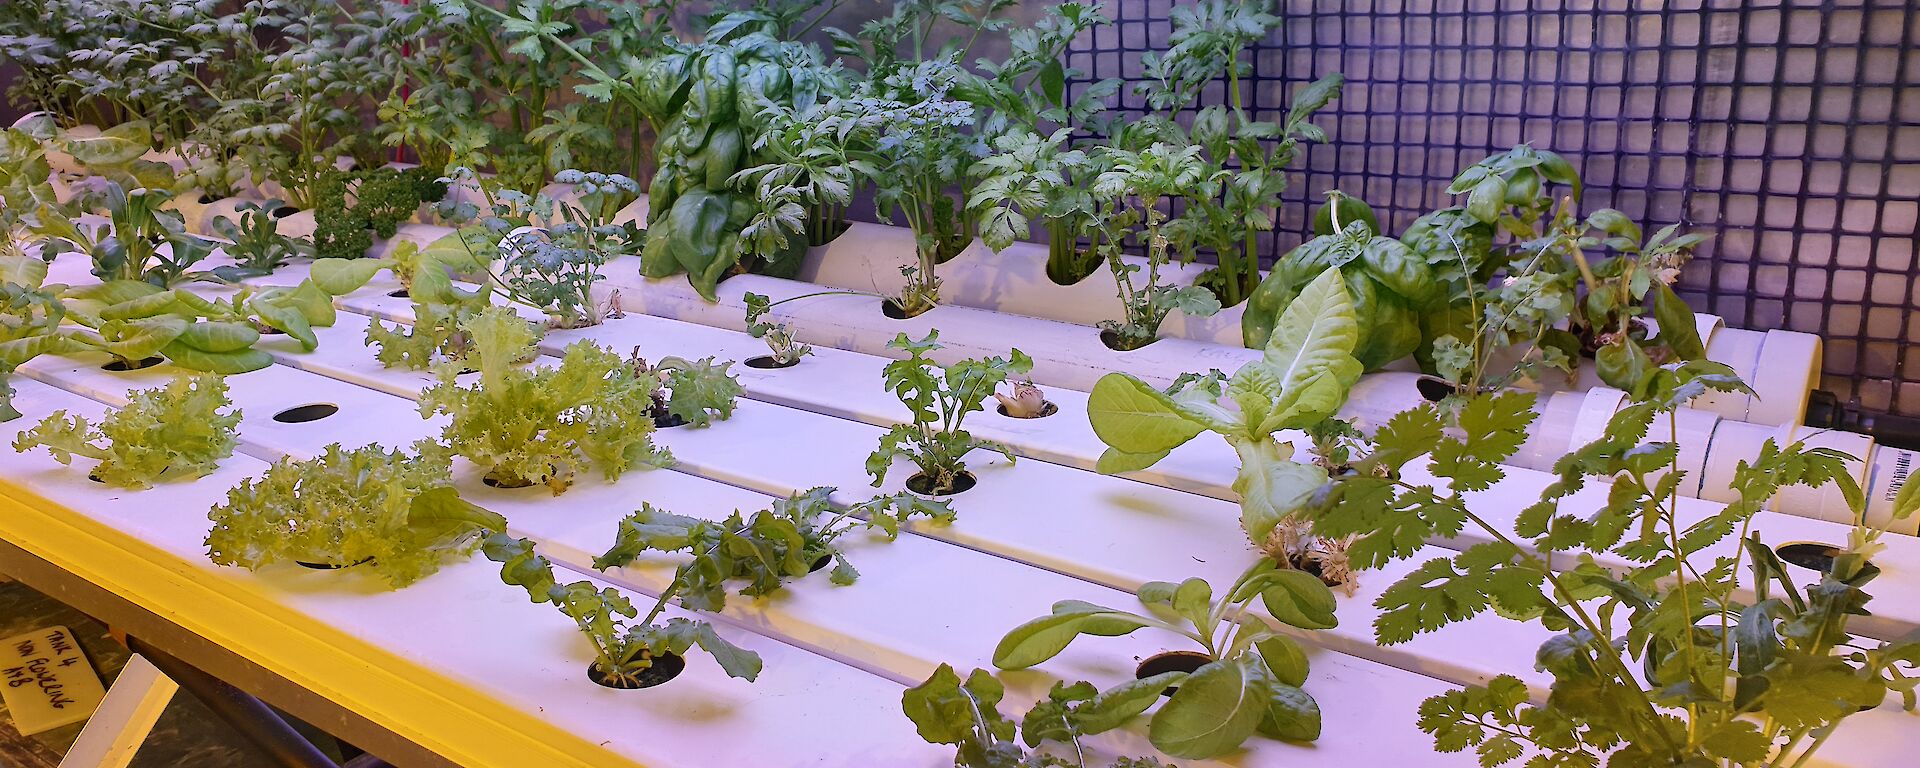 Celery, lettuces, spinach, coriander, basil and rocket growing in the Hydroponics facility at Casey